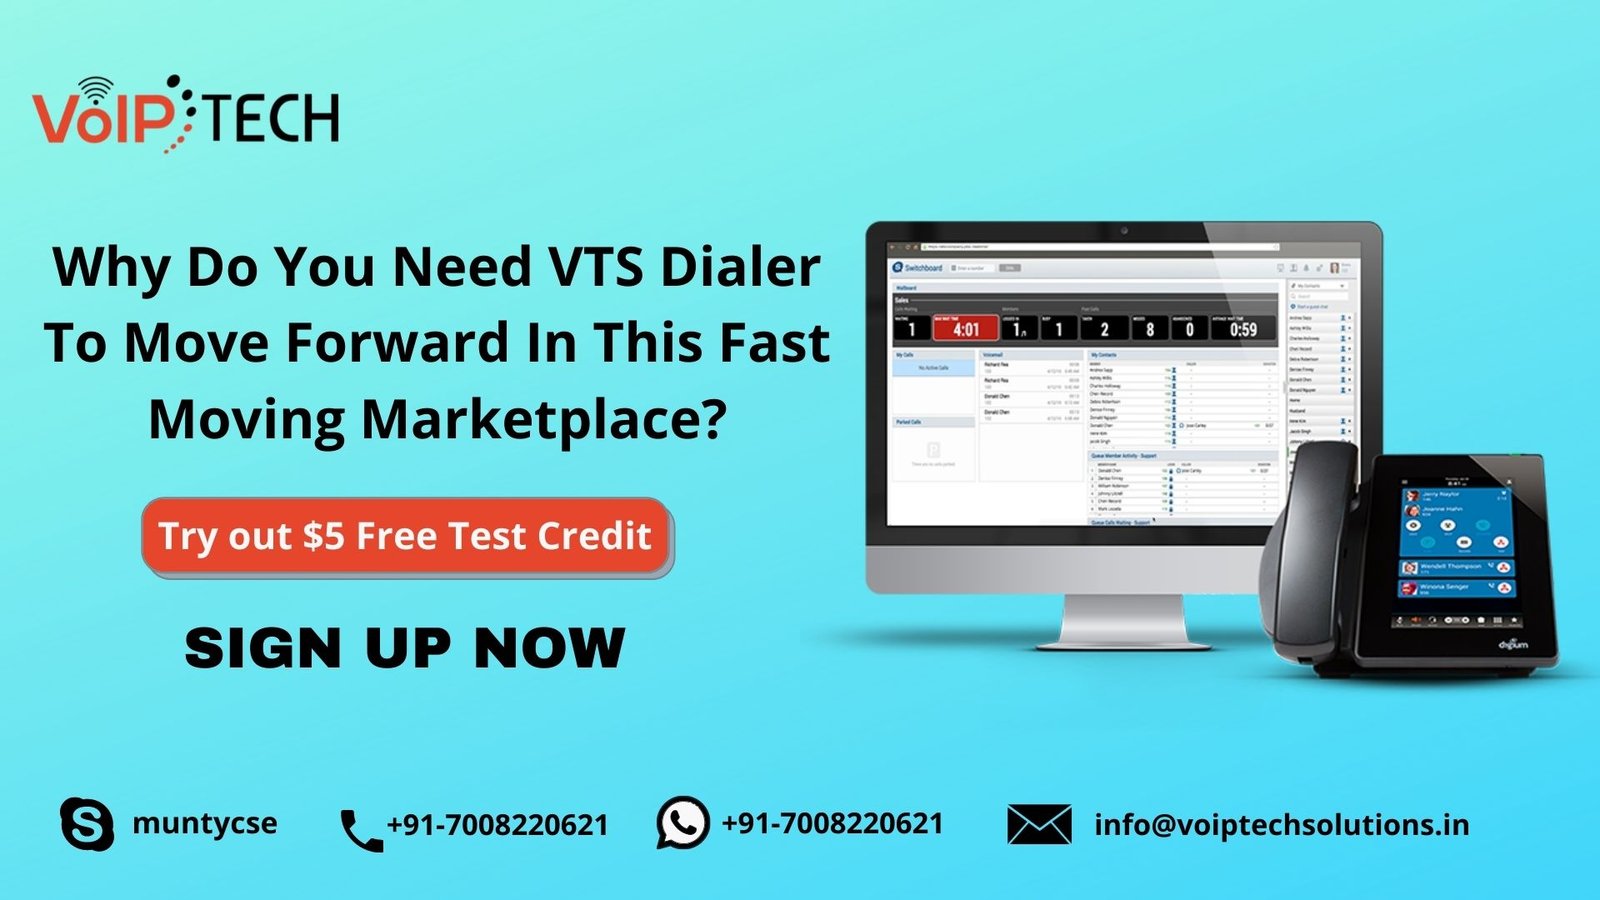 VoIP Telephony, Why Do You Need VTS Dialer To Move Forward In This Fast Moving Marketplace?, VoIP tech solutions, vici dialer, virtual number, Voip Providers, voip services in india, best sip provider, business voip providers, VoIP Phone Numbers, voip minutes provider, top voip providers, voip minutes, International VoIP Provider